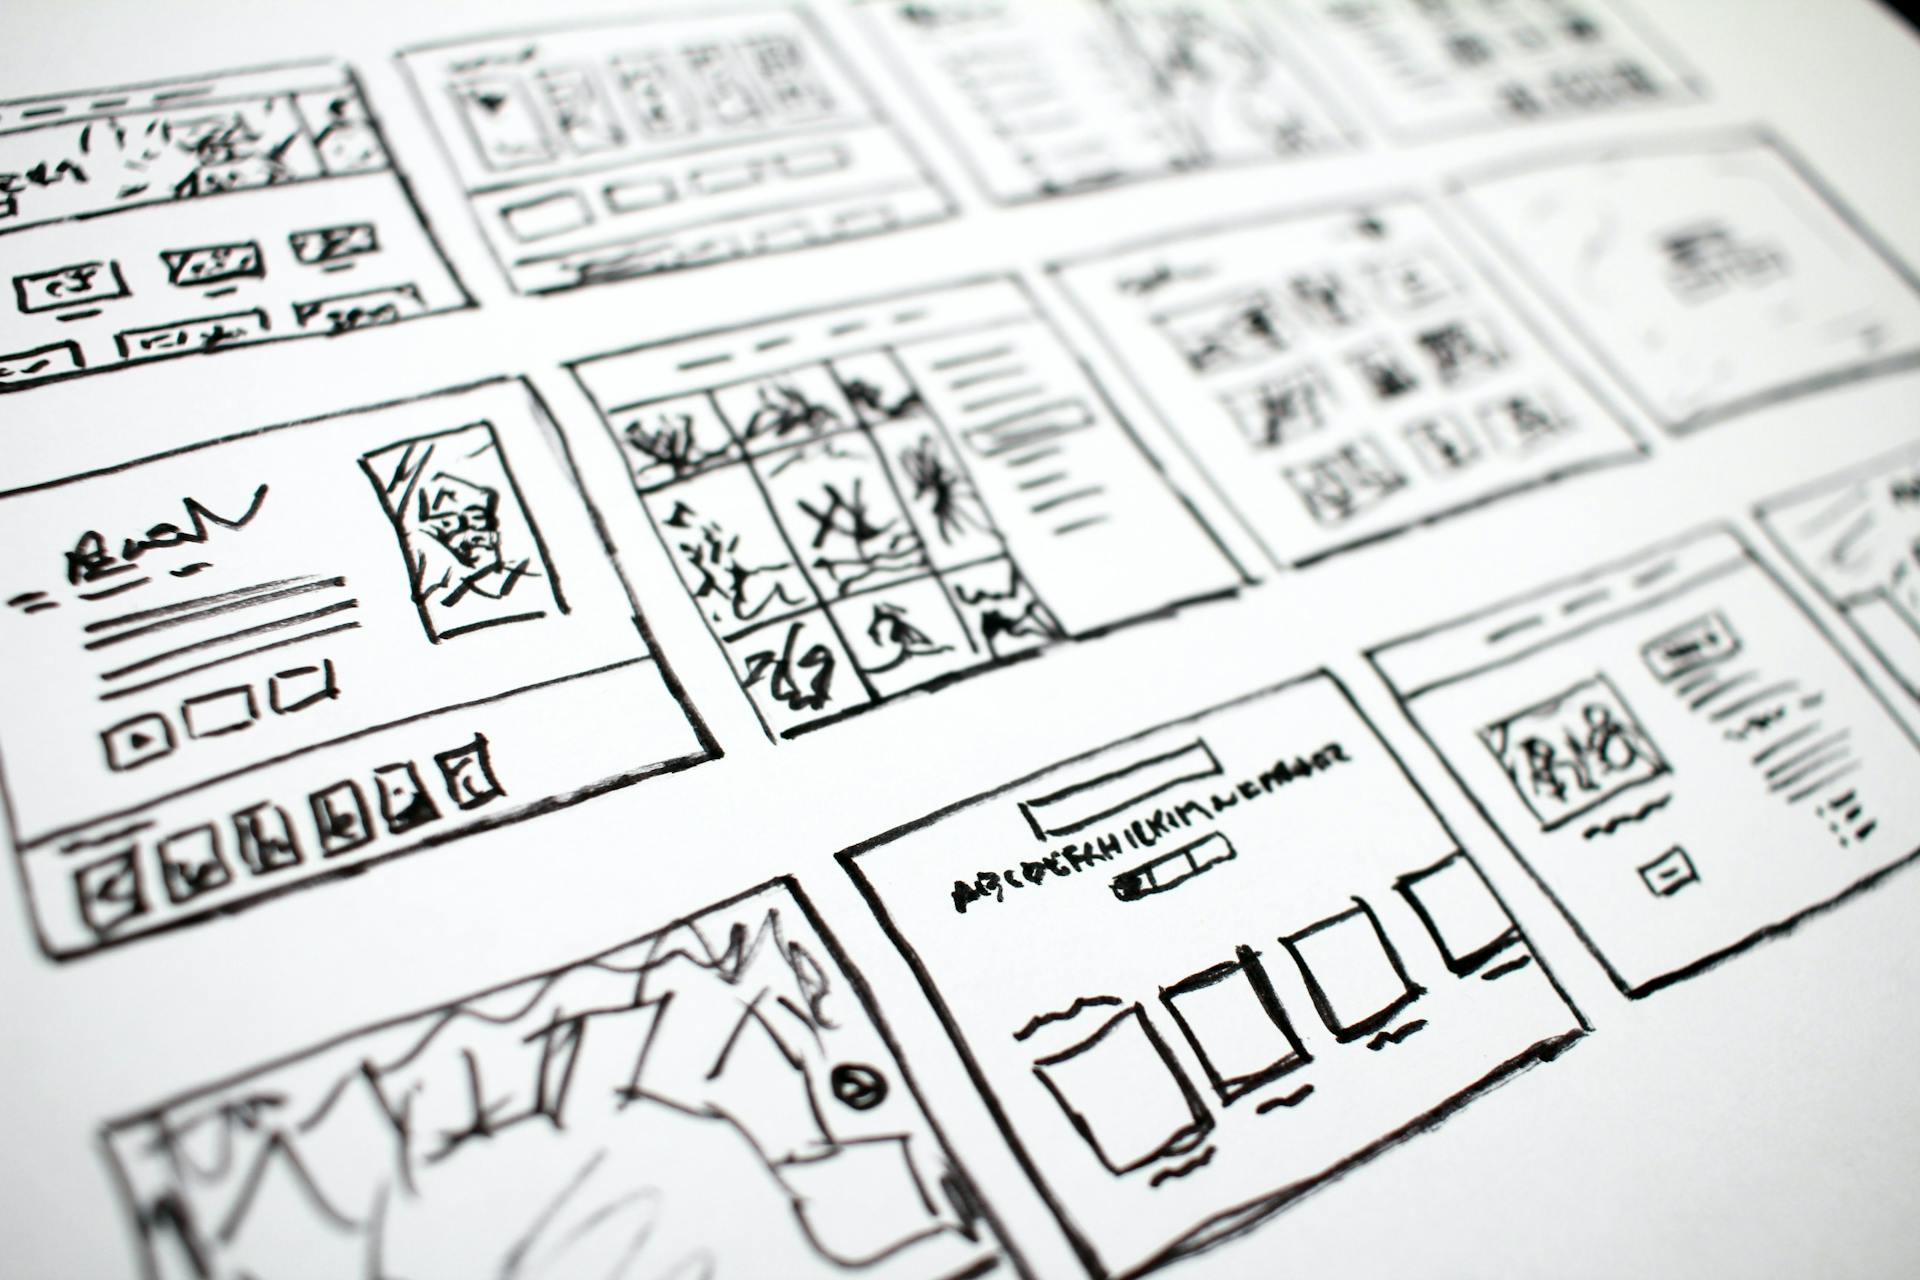 Sample storyboard for making a YouTube video